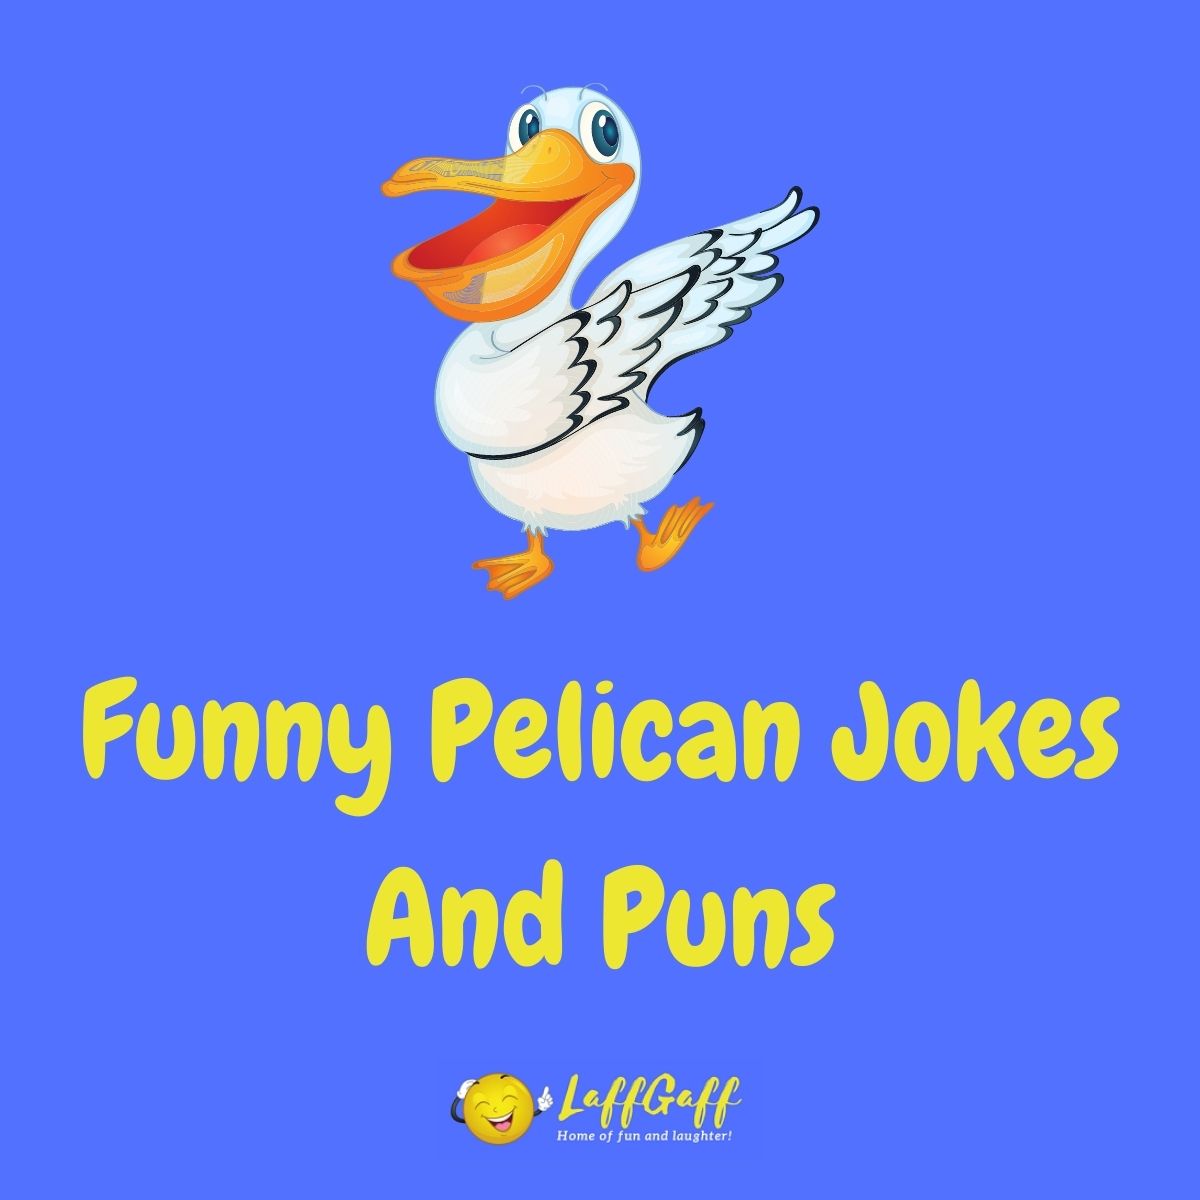 Featured image for a page of funny pelican jokes and puns.